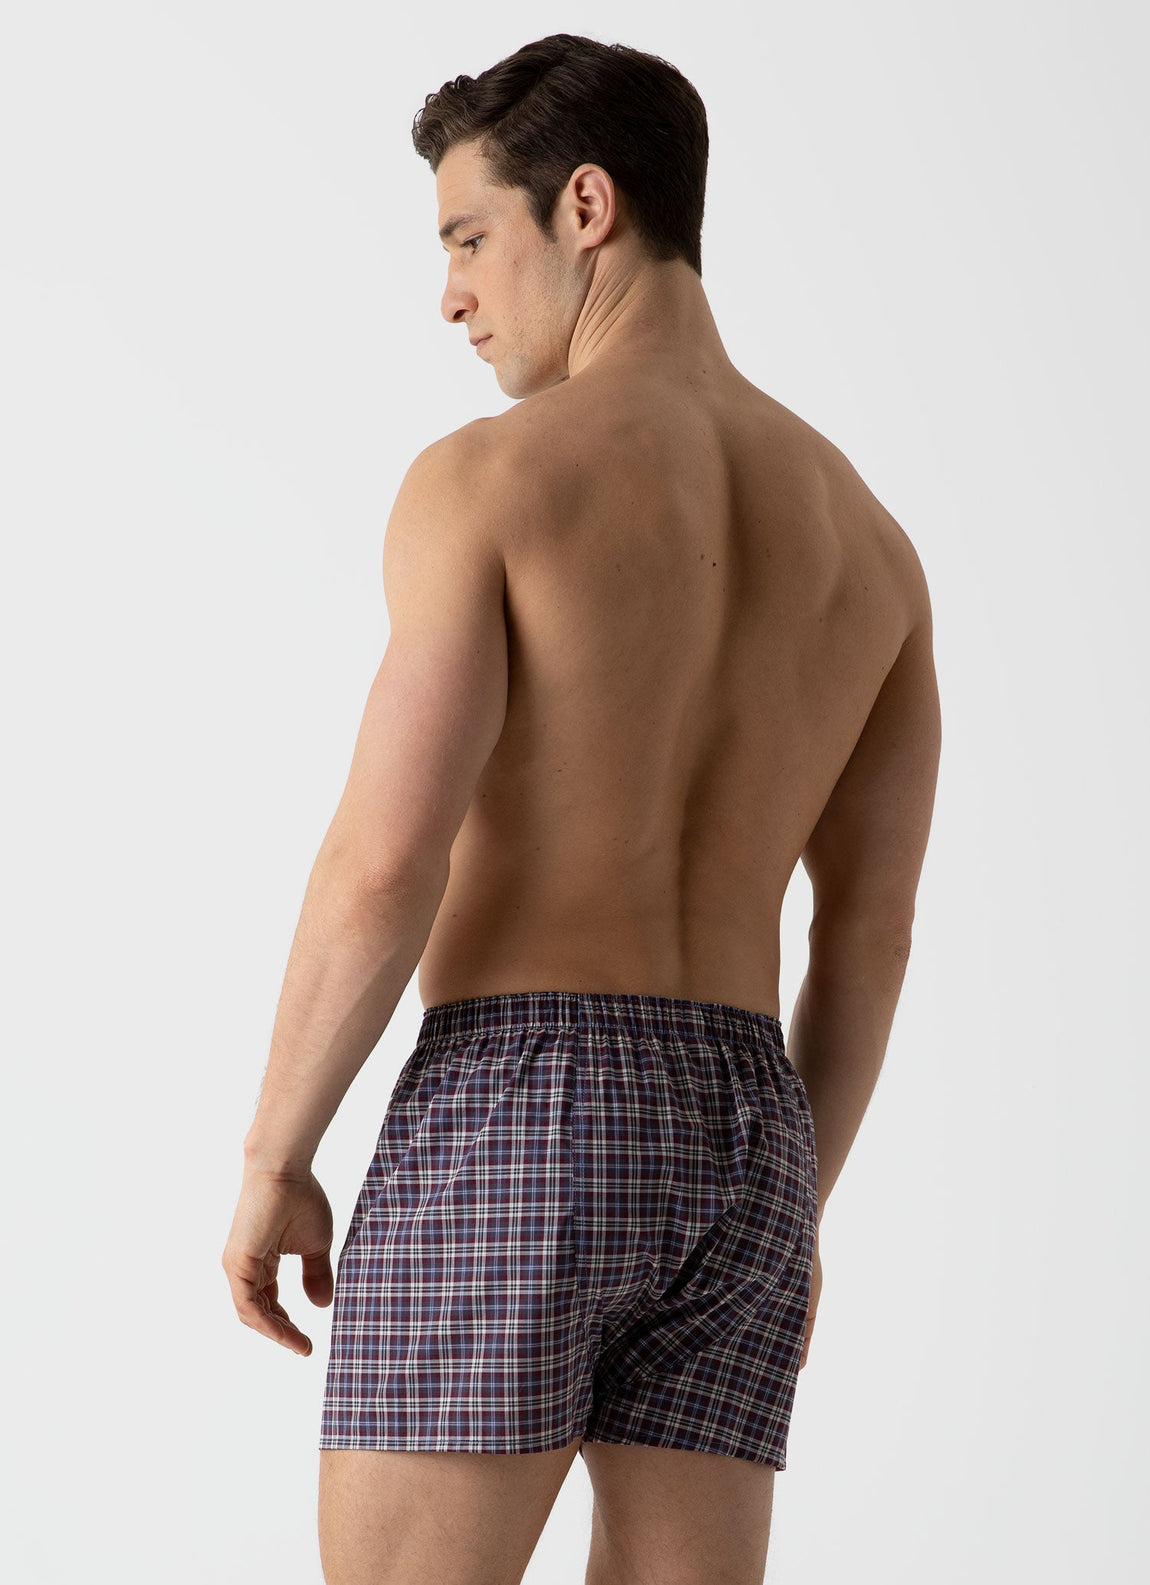 Men's Classic Boxer Shorts in Maroon Check